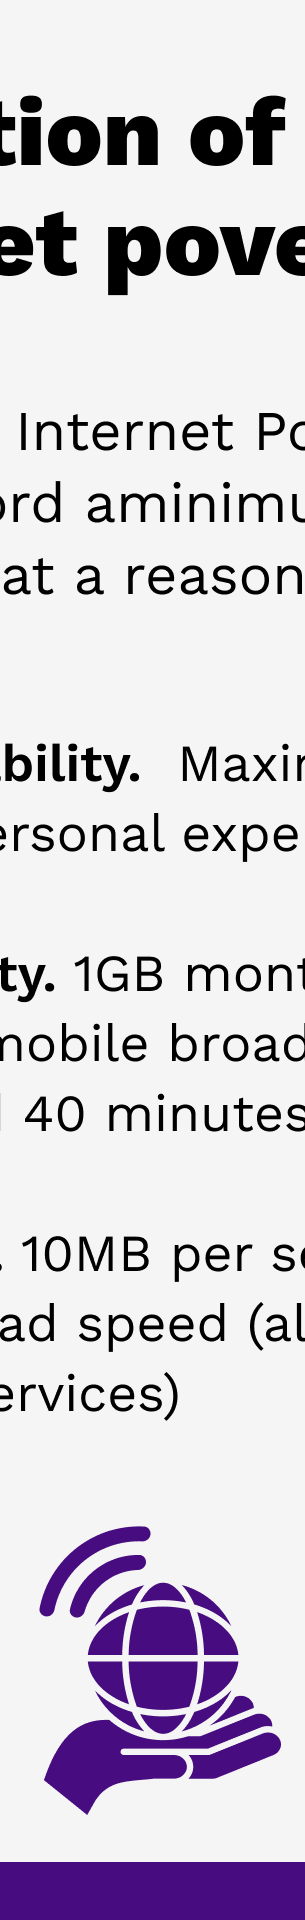 This is the definition of internet poverty.